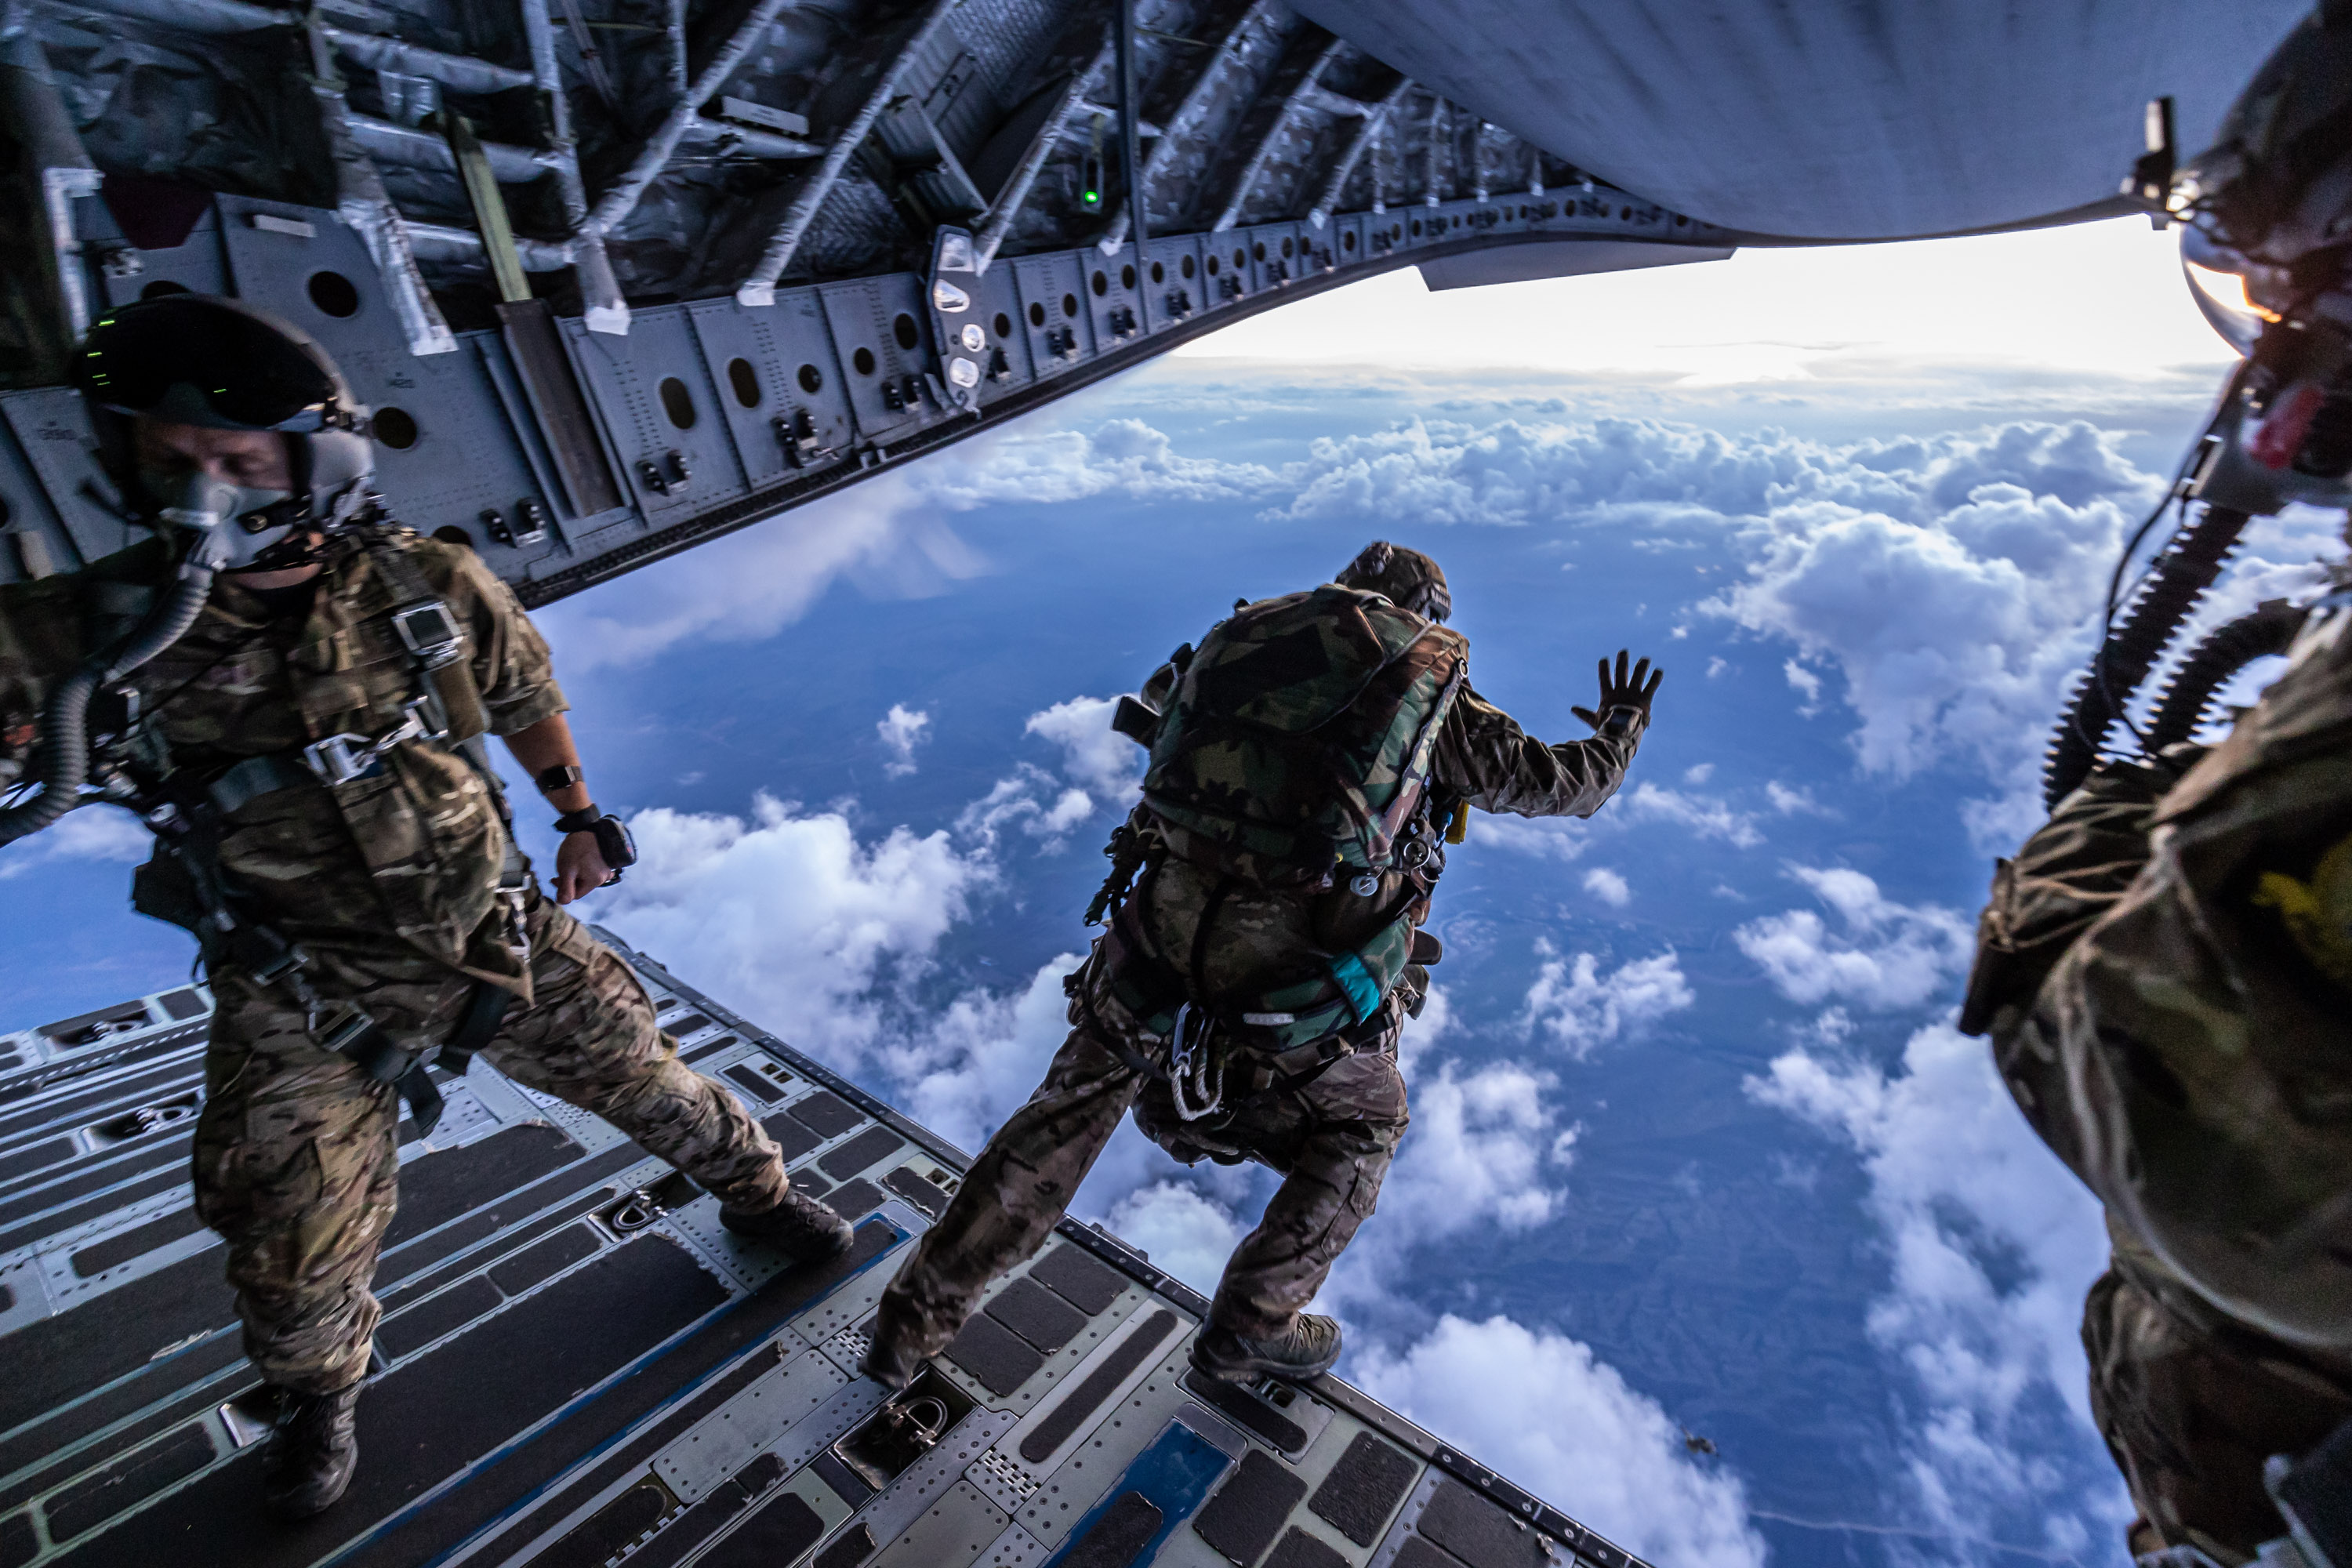 Pathfinders jump from the carrier of Globemaster.